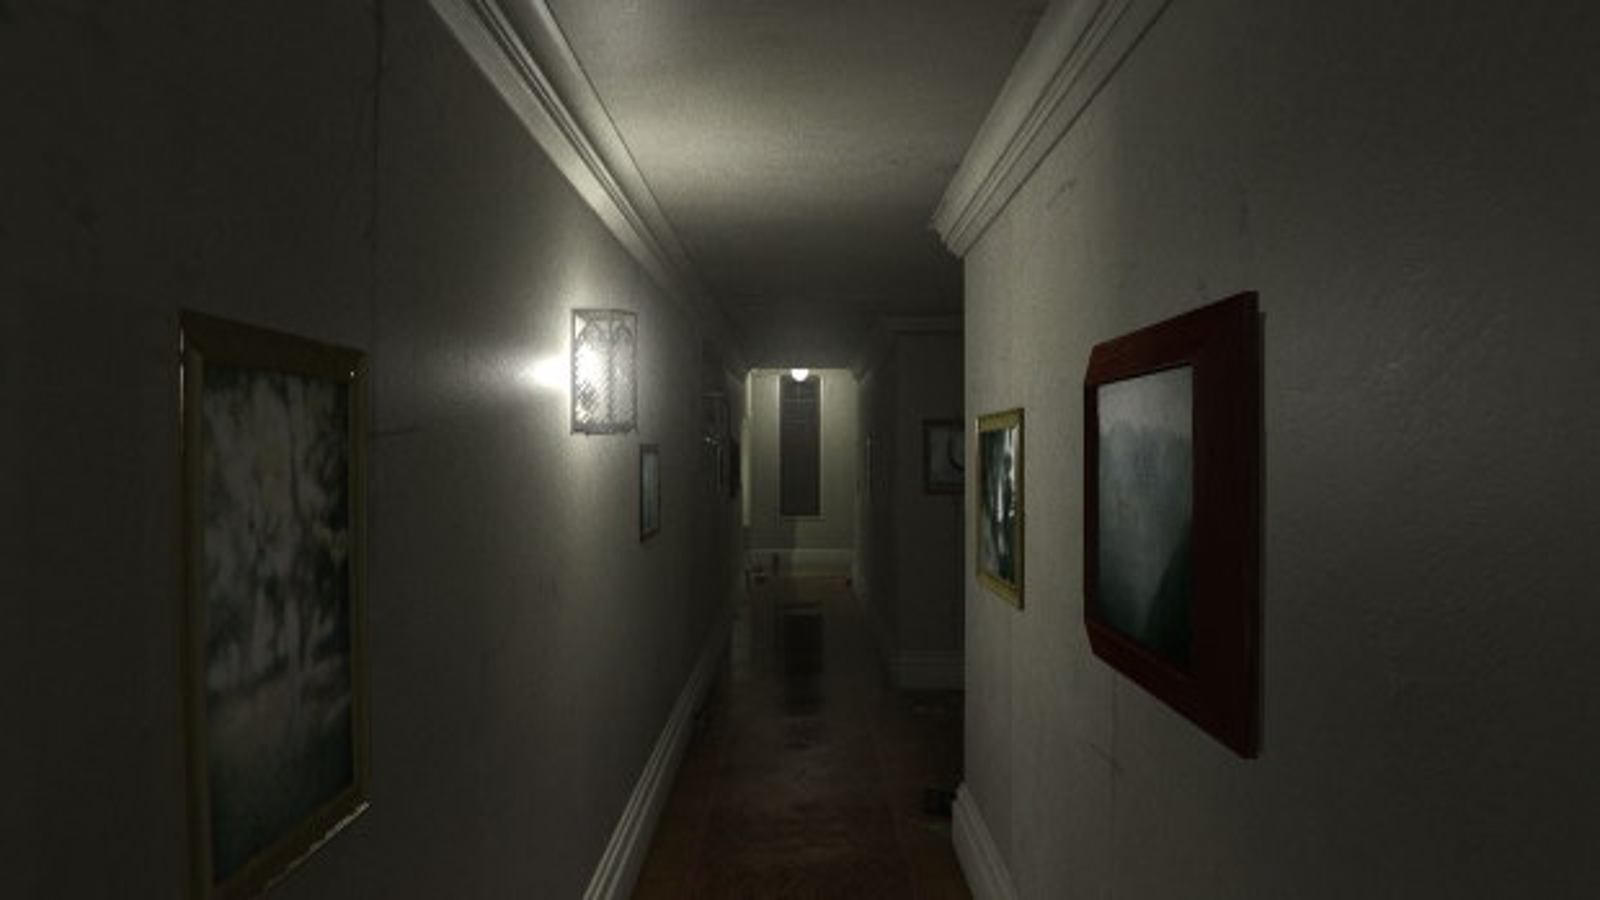 P.T. (Silent Hills)' Game Review - Project-Nerd